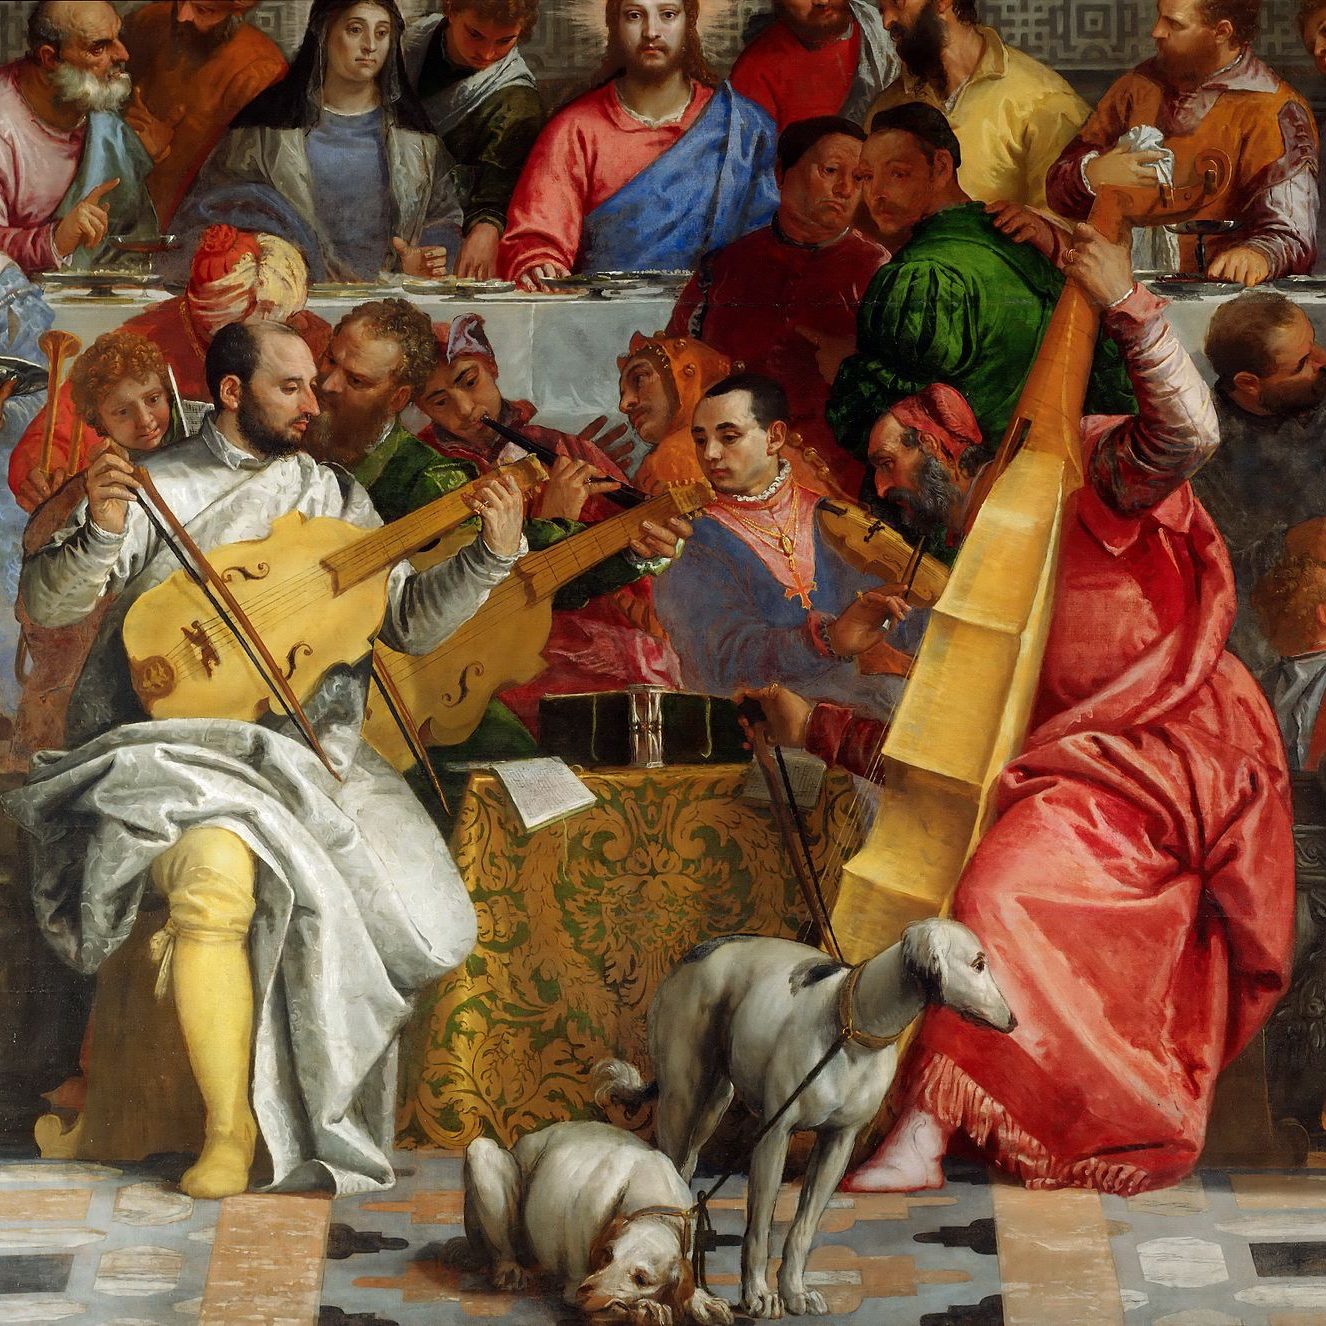 Paolo_Veronese
The Marriage at Cana
Muzykanci